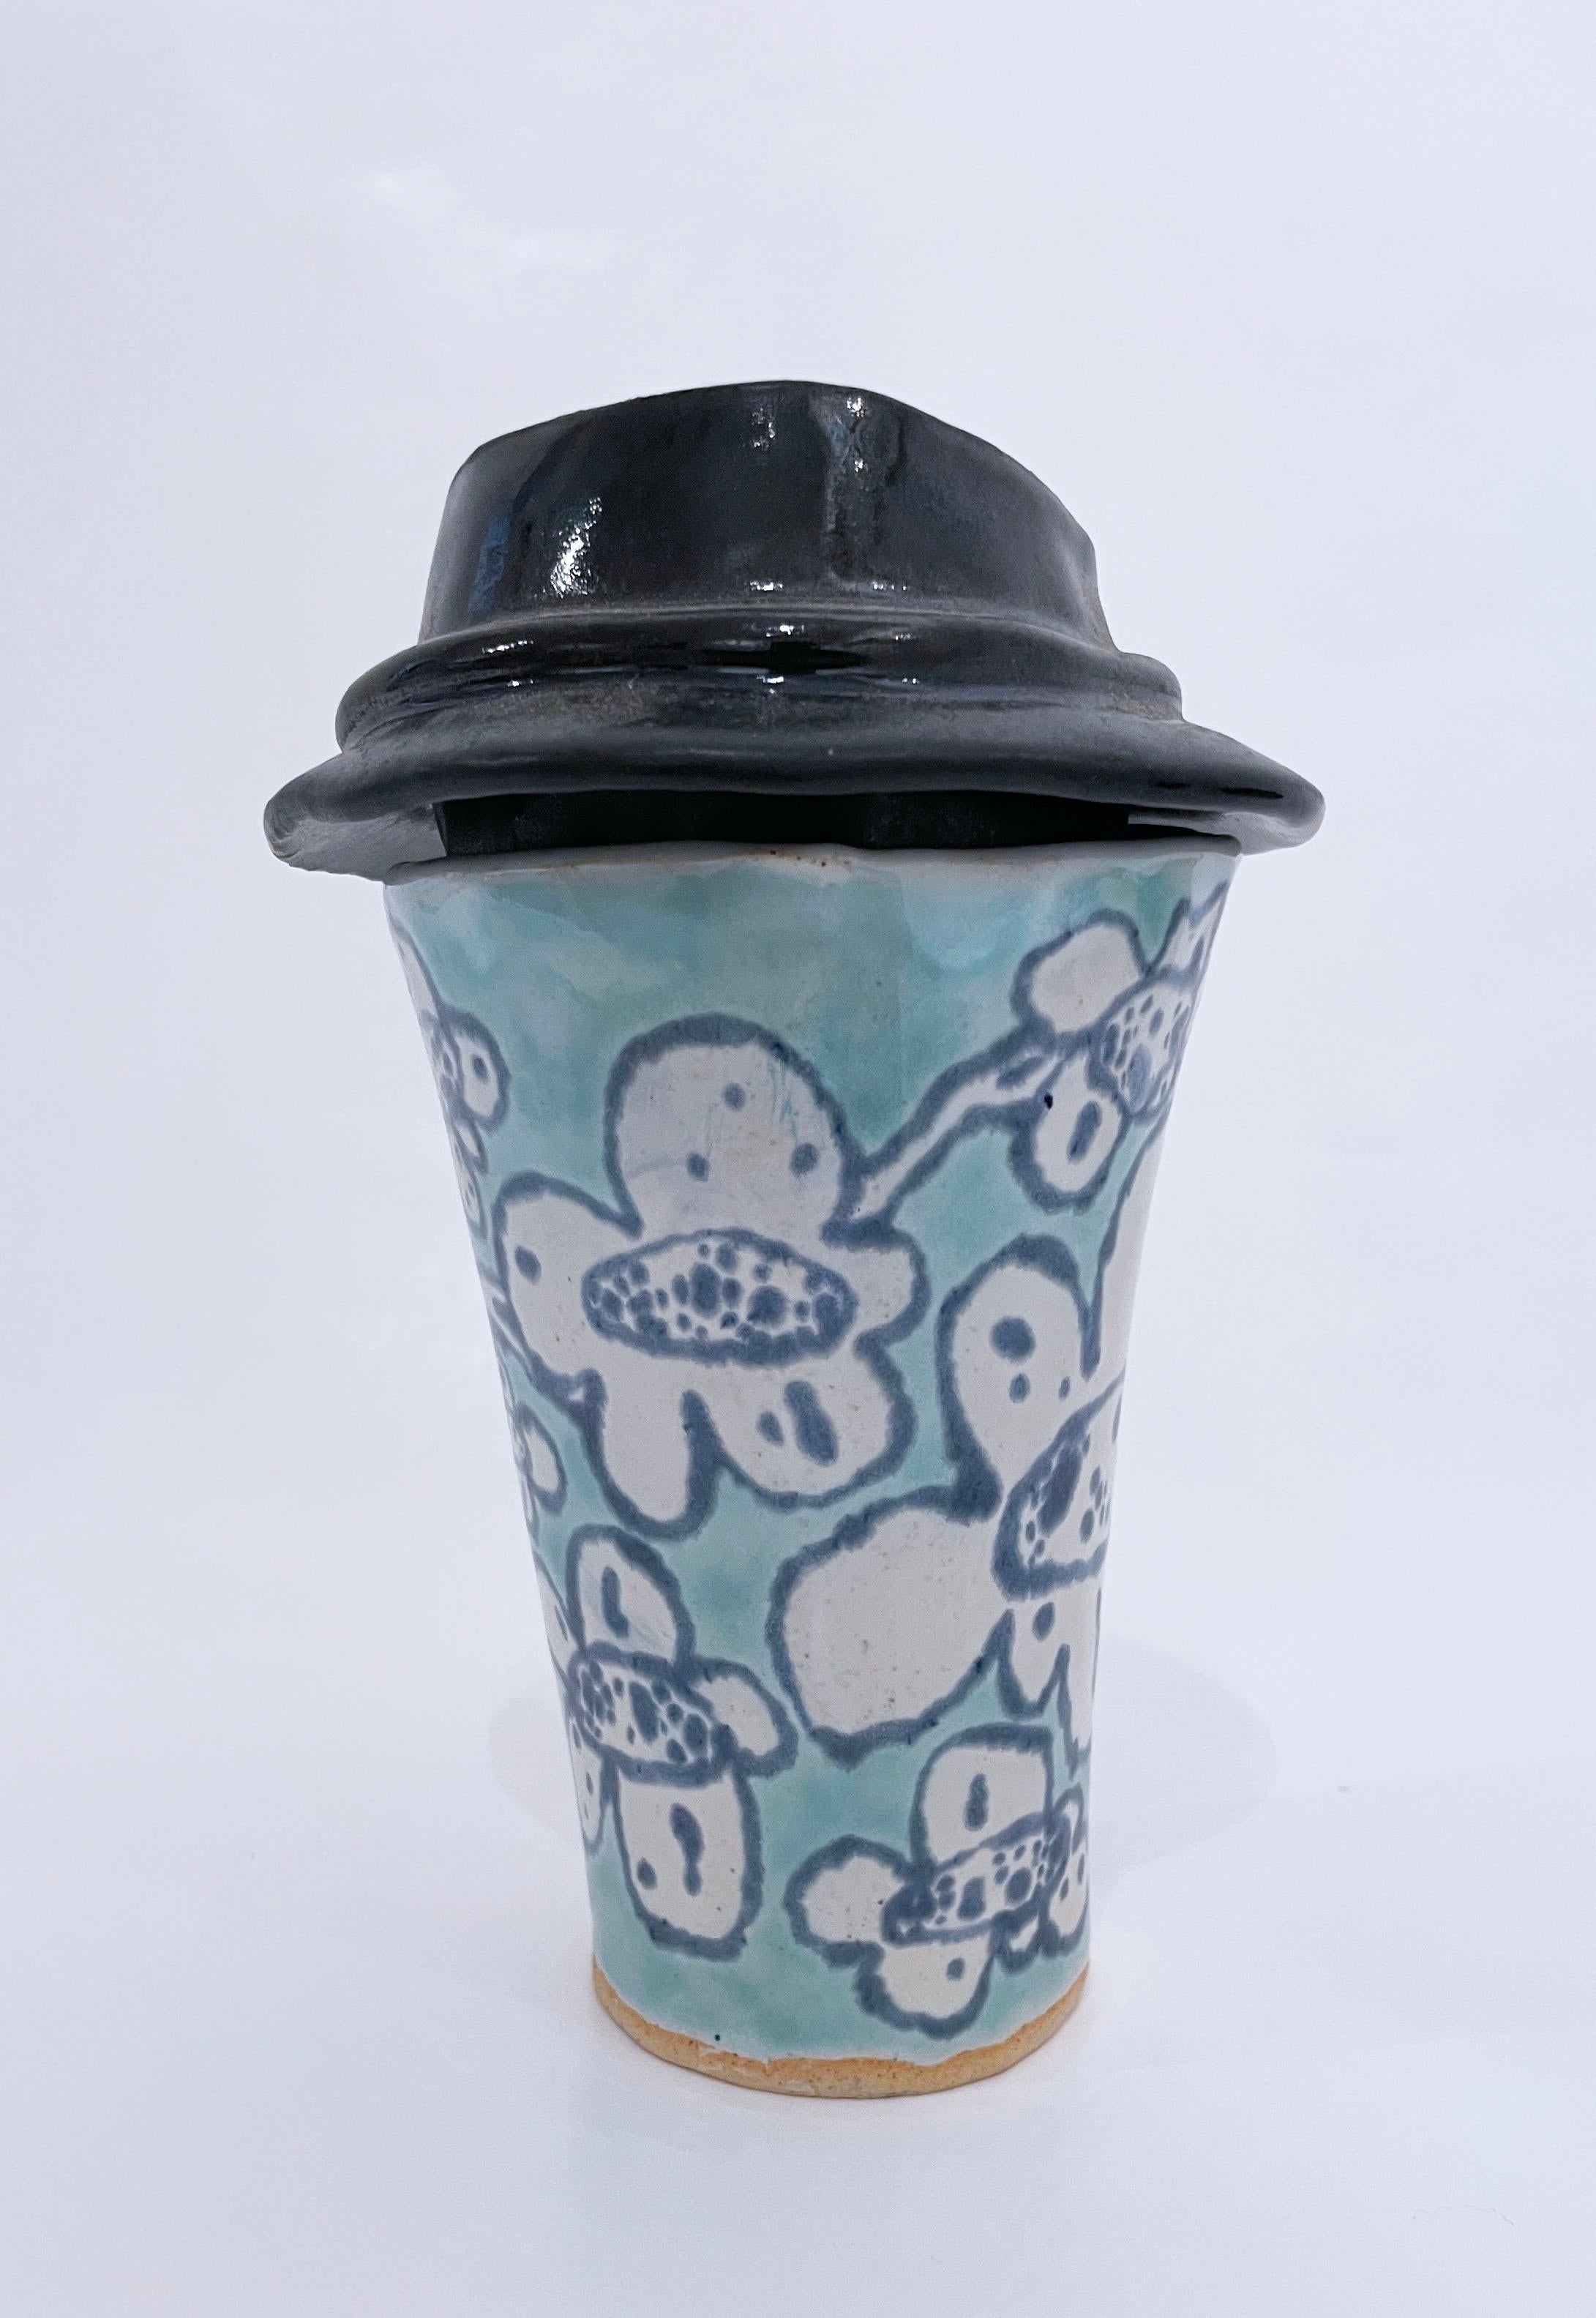 Blossom Cup (2022), glazed ceramic, clay tumbler with clay lid, coffee mug, floral pattern, aqua, cerulean, pale turquoise, white with black lid. Functional art object.

Hand glazed, hand built ceramic coffee cup inspired by to go or take out paper